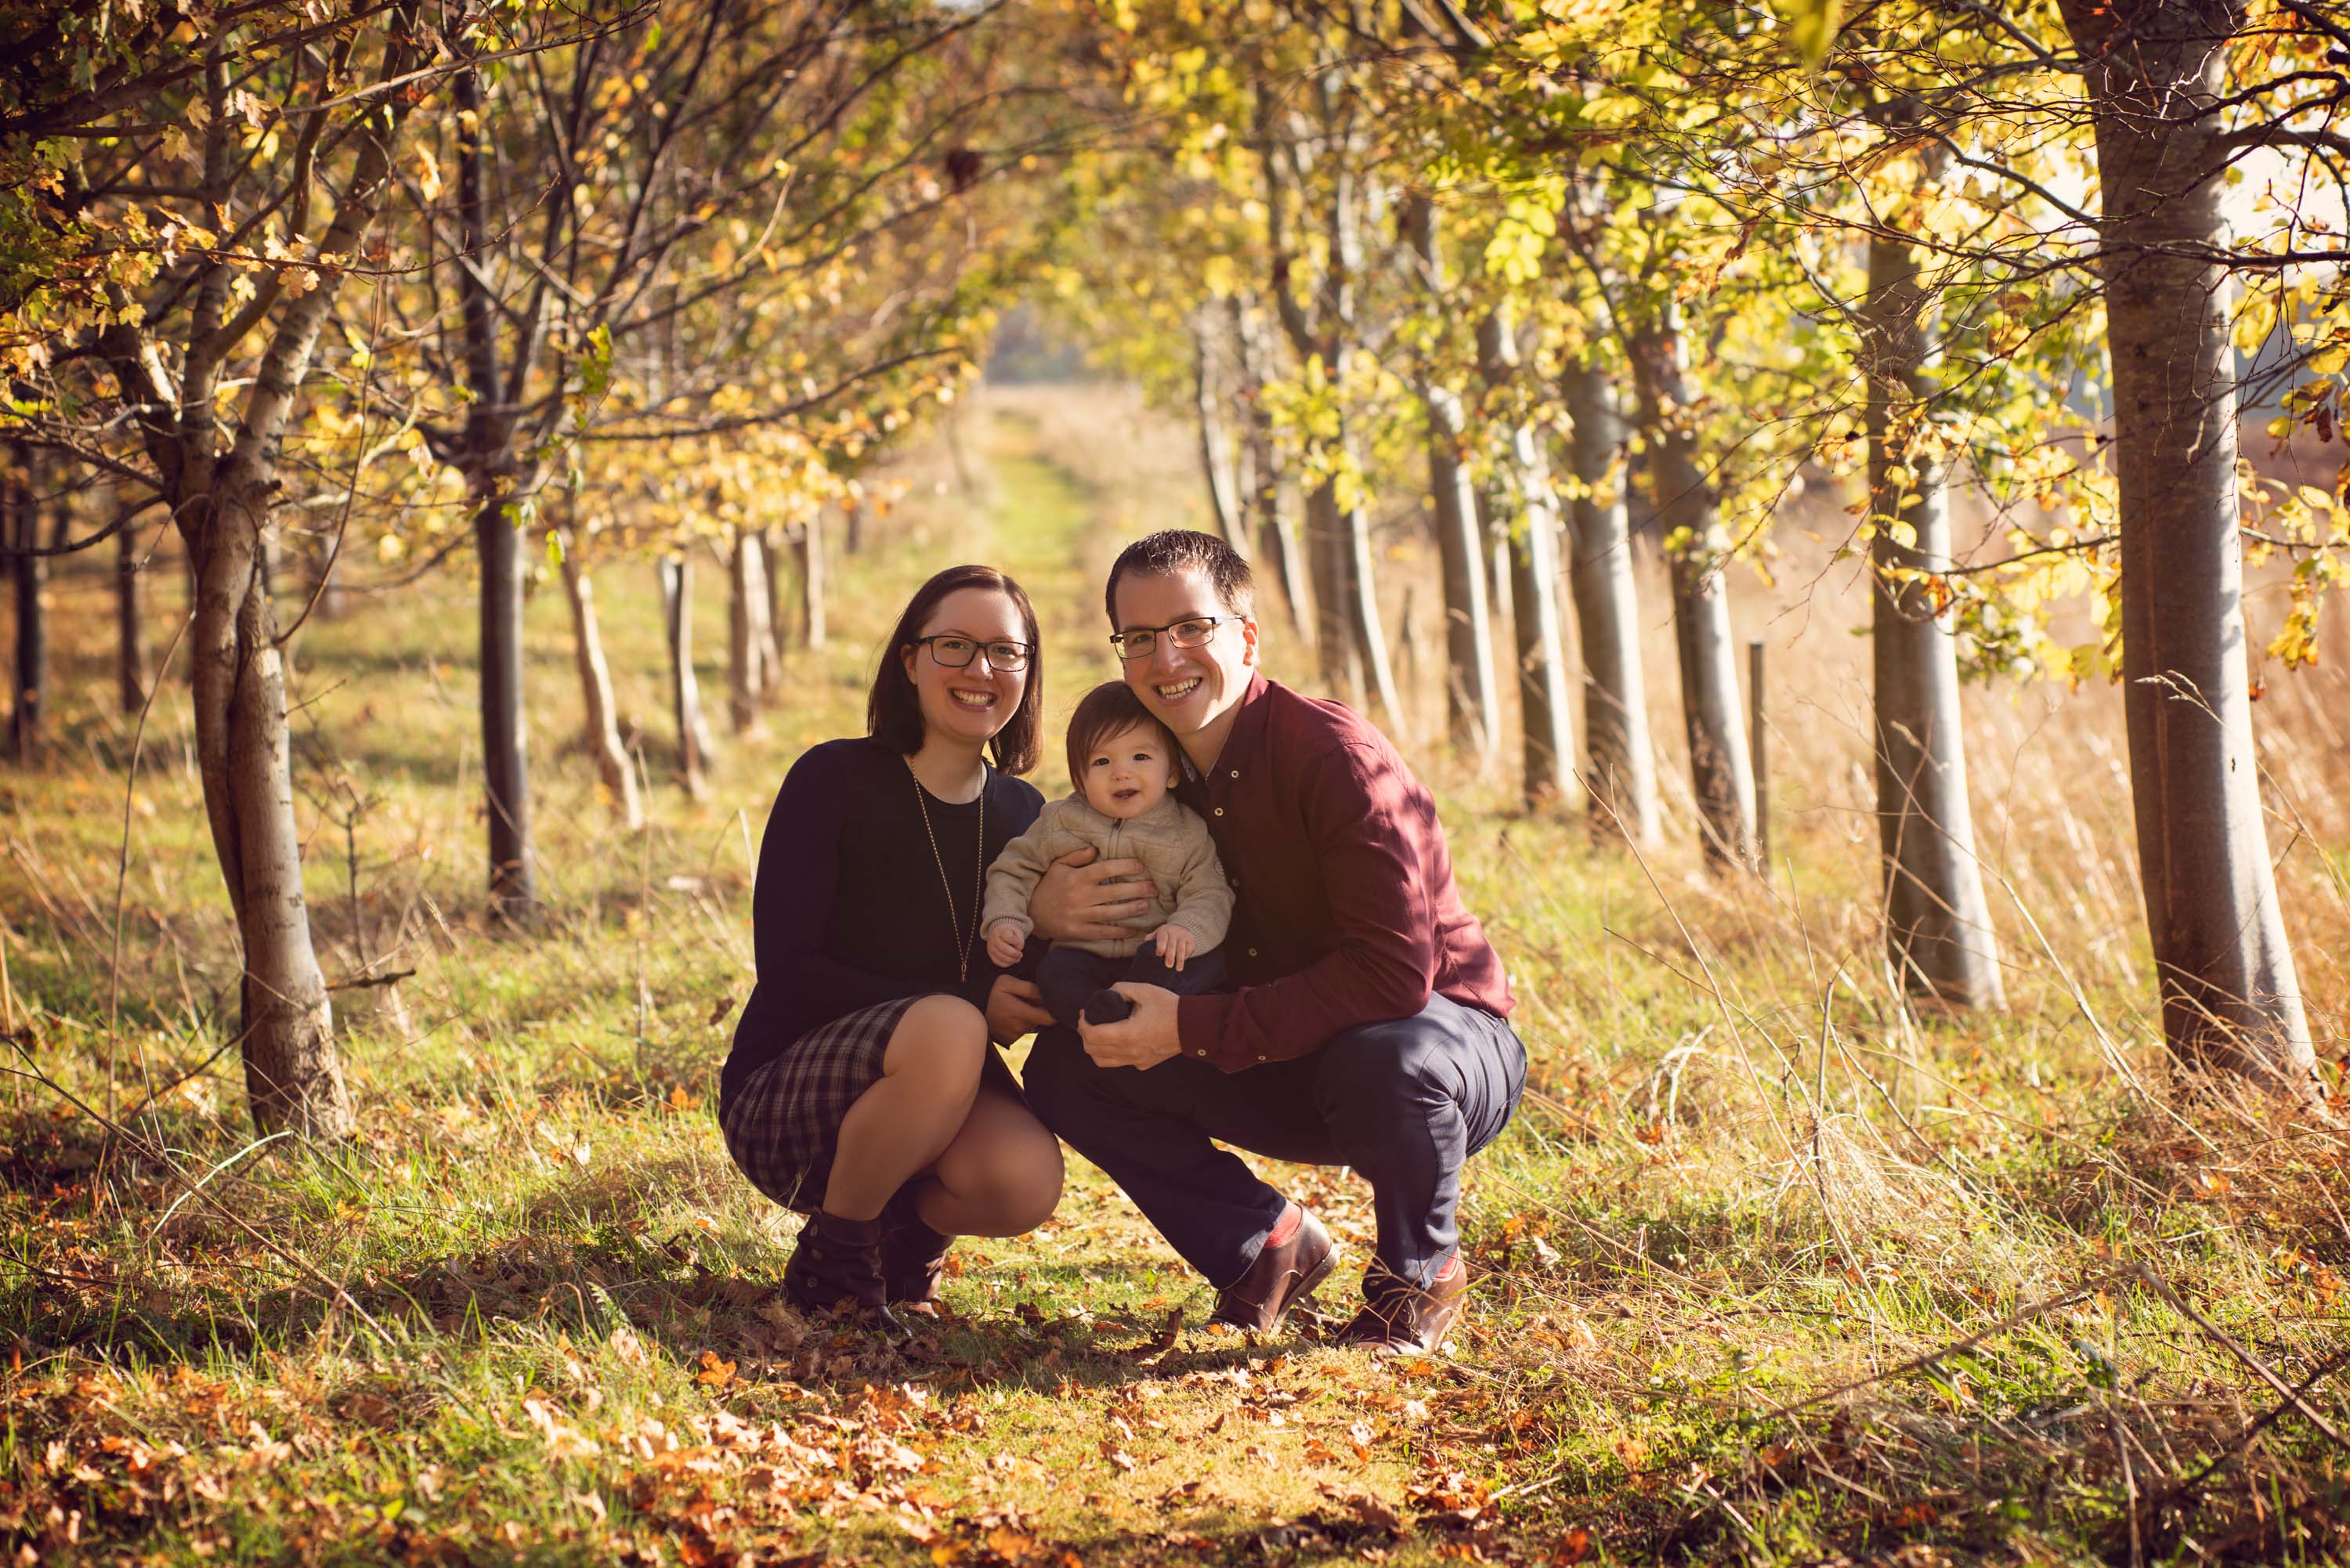 Family portrait photographed in autumn woodland